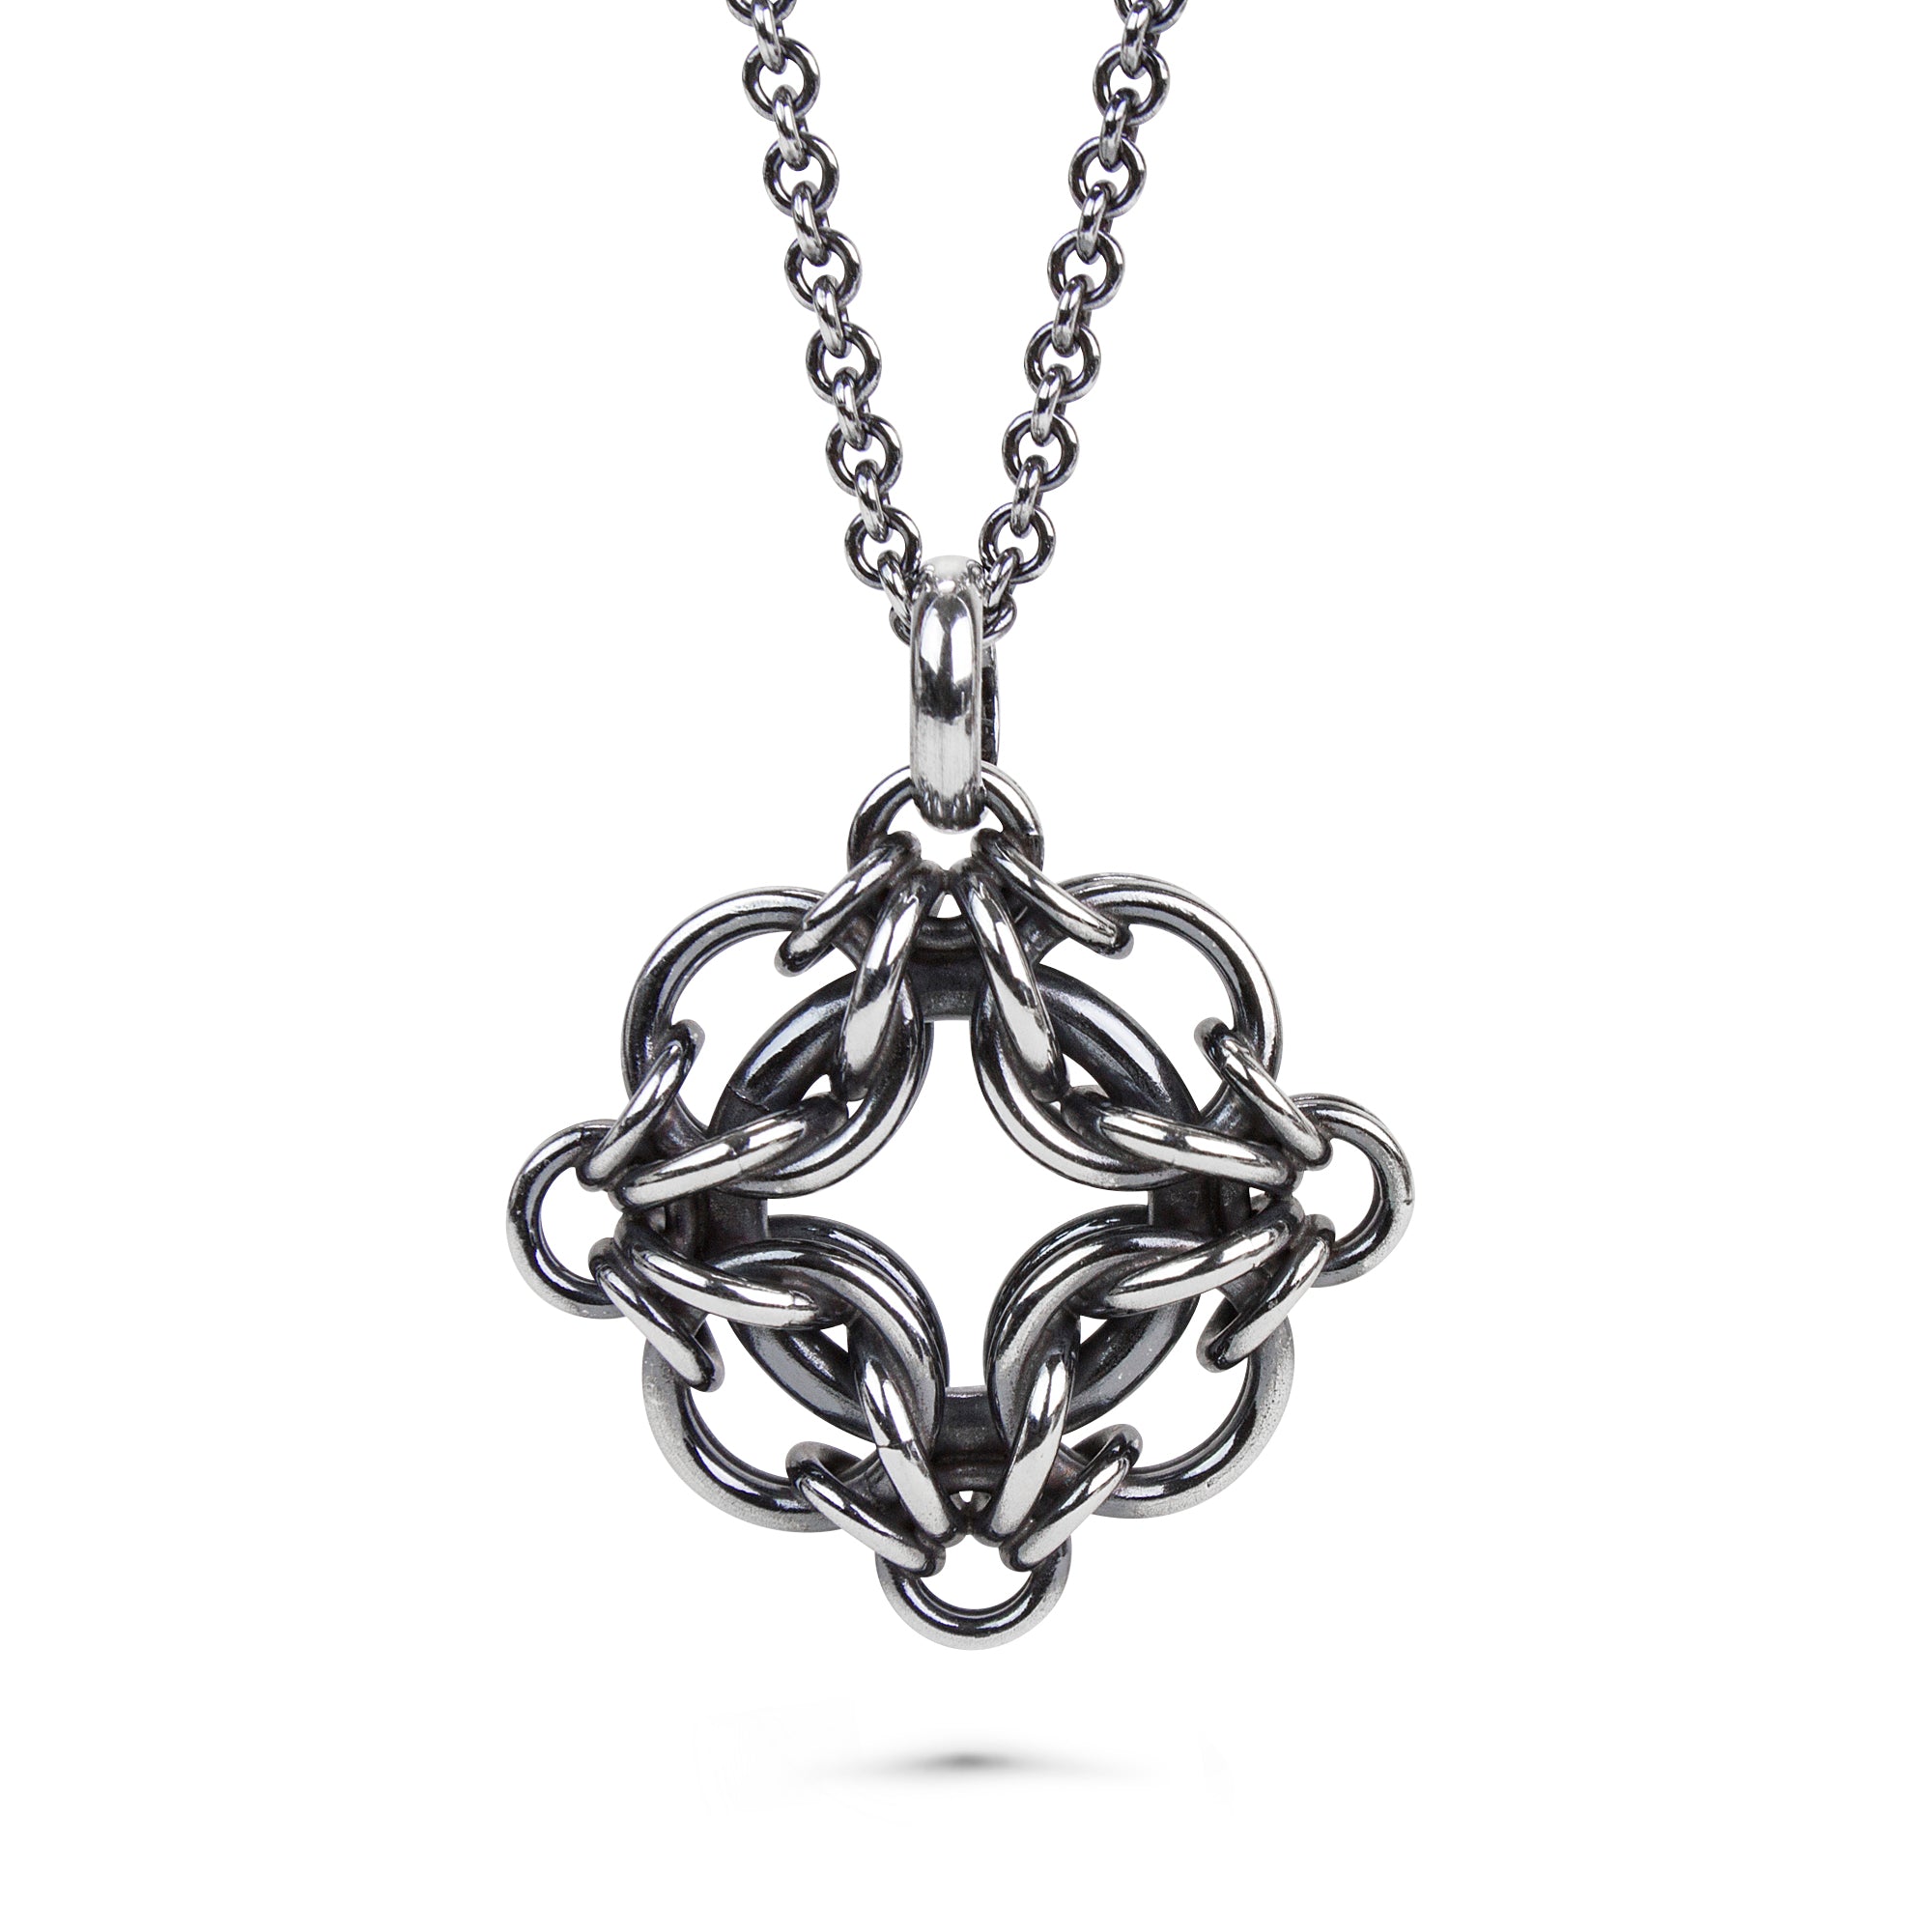 "Celestial" Fused Chainmaille Pendant Necklace, Medium